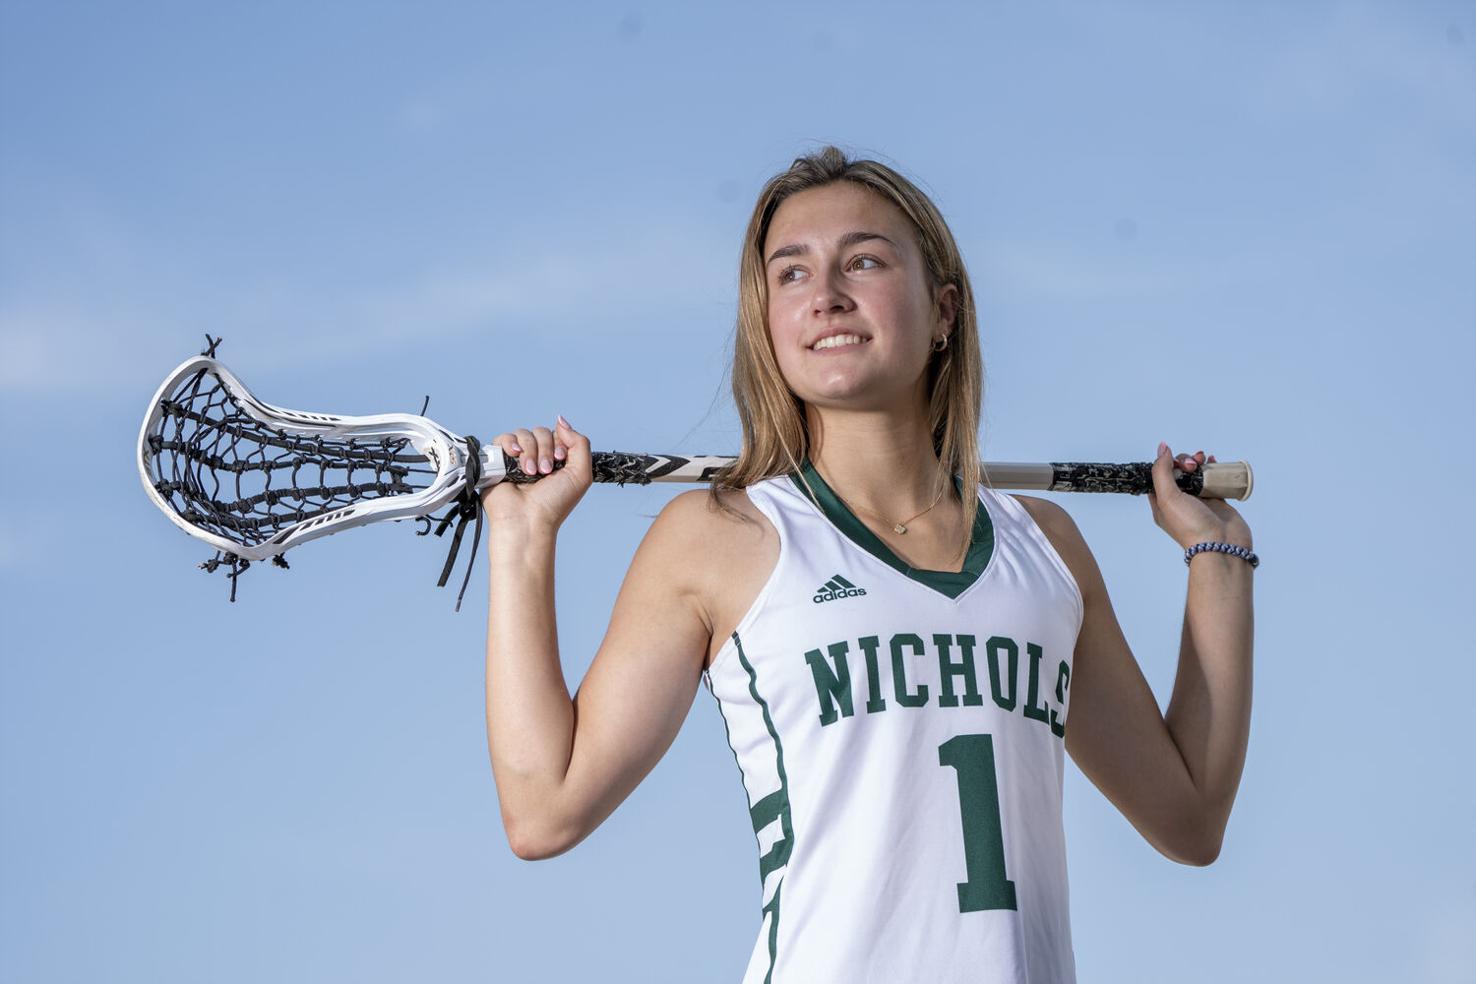 Meet the 2022 All-WNY girls lacrosse team